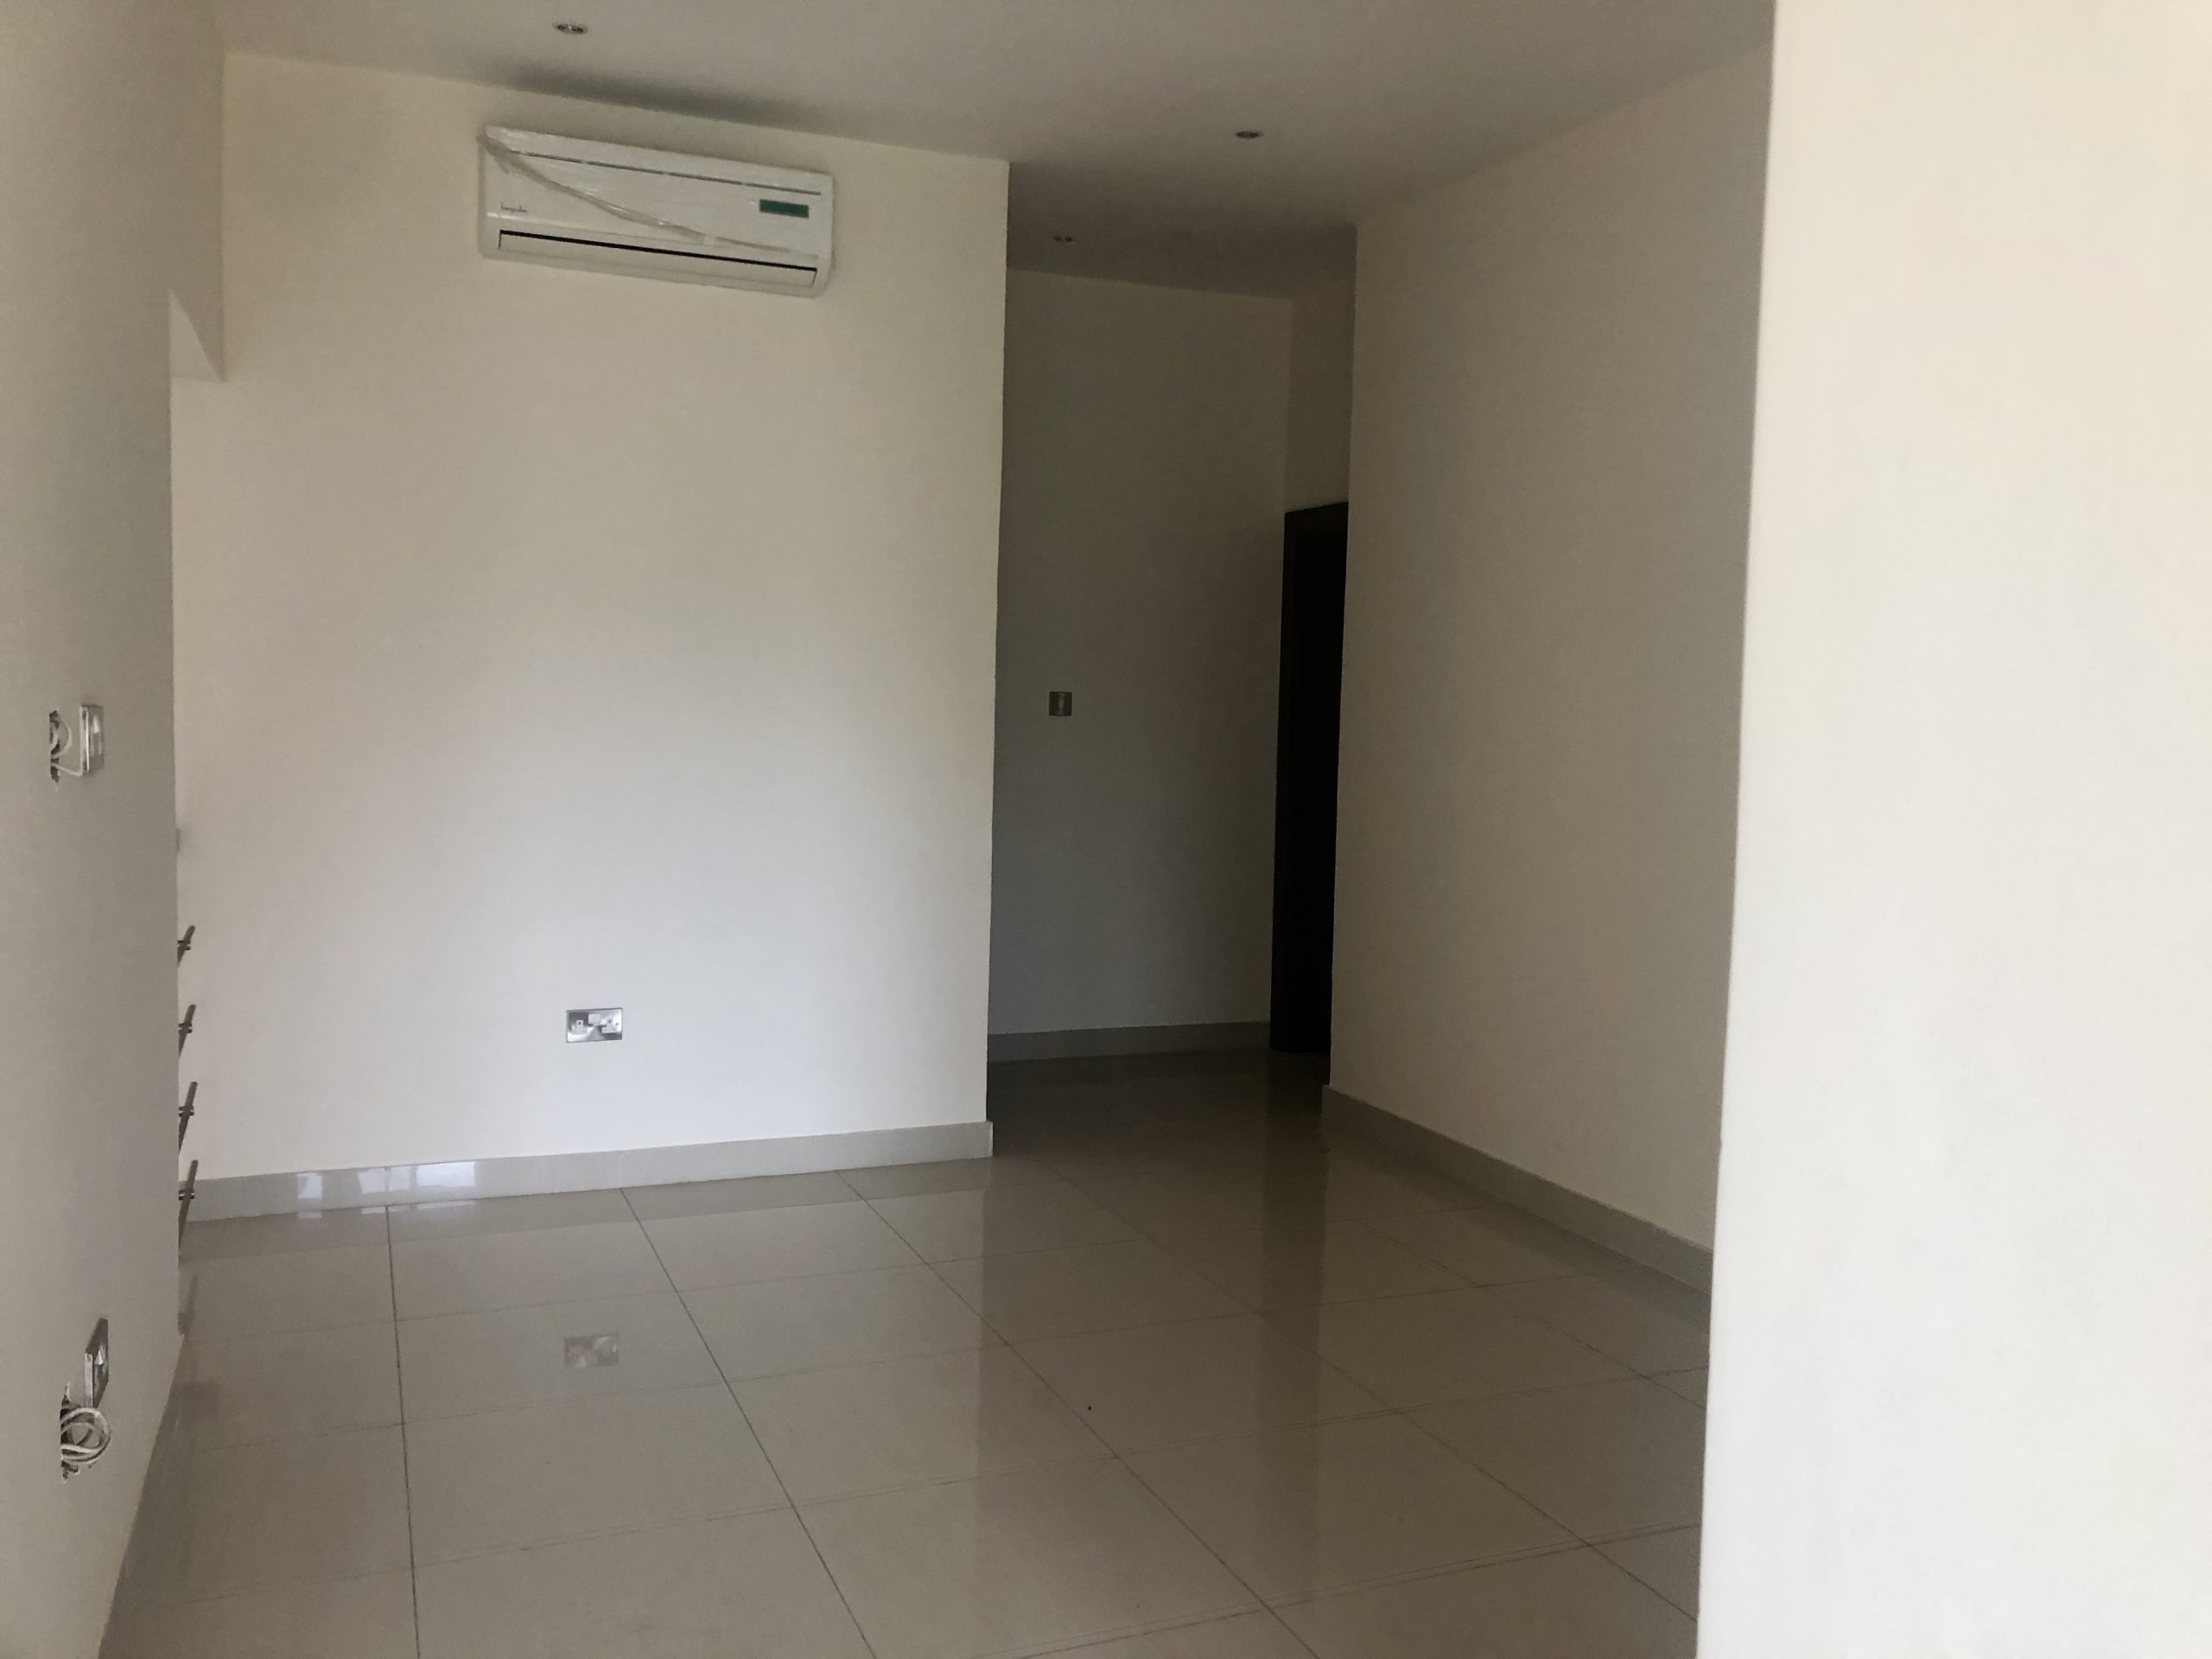 2 Bedroom Apartment For Rent in East Airport, Accra